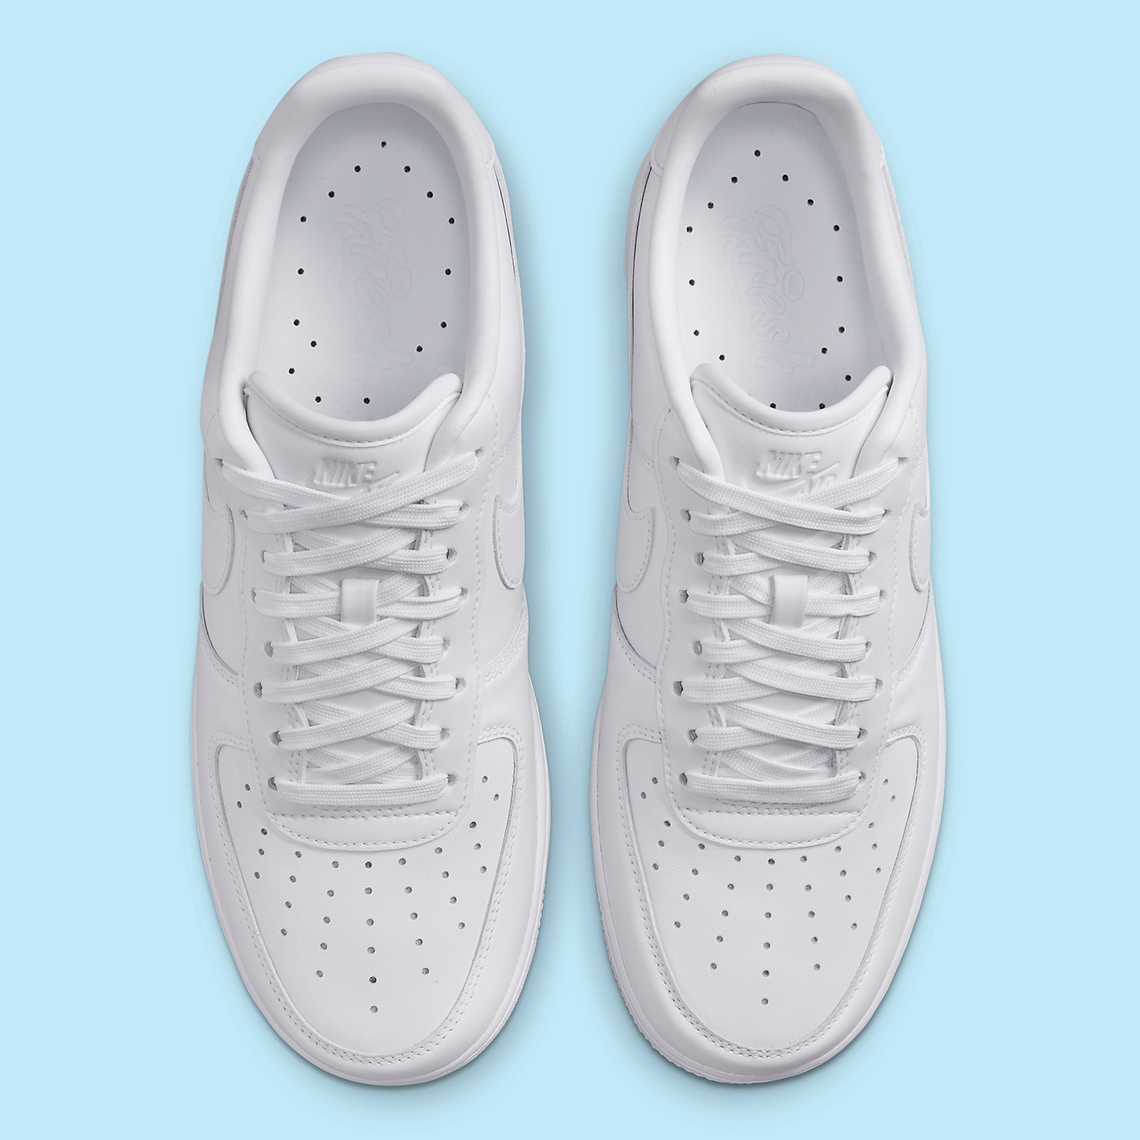 Nike Air Force 1 LV8 Vac Tech Independence Day (White) - Sneaker Freaker